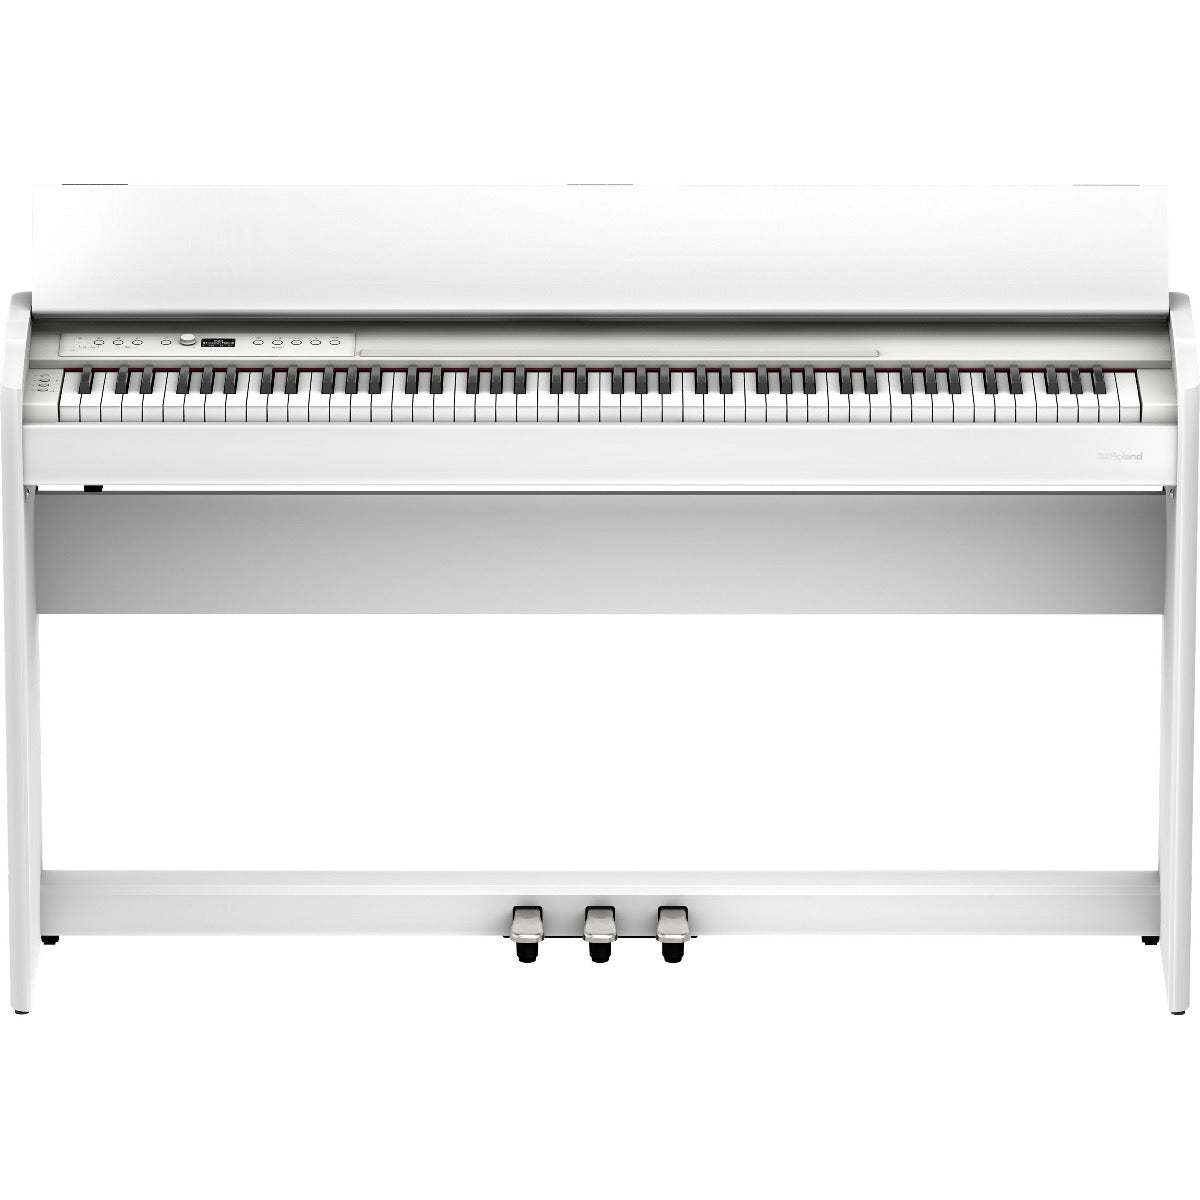 Perspective view of Roland F701 Digital Piano - White showing top and front